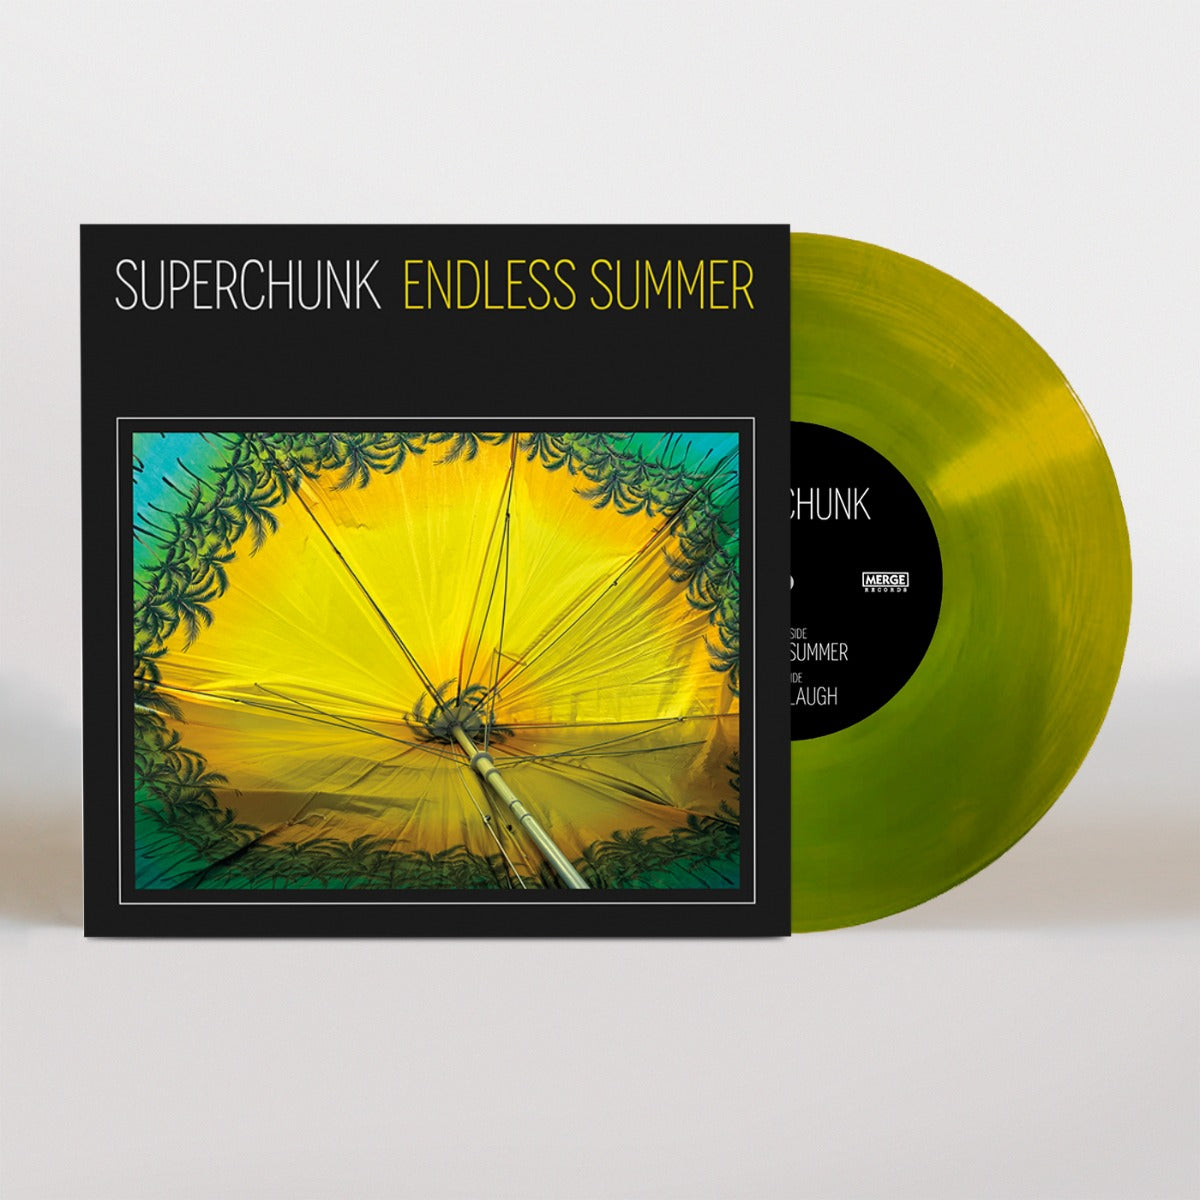 Superchunk | "Endless Summer" b/w "When I Laugh" 7-inch INDIE EXCLUSIVE VARIANT | Vinyl